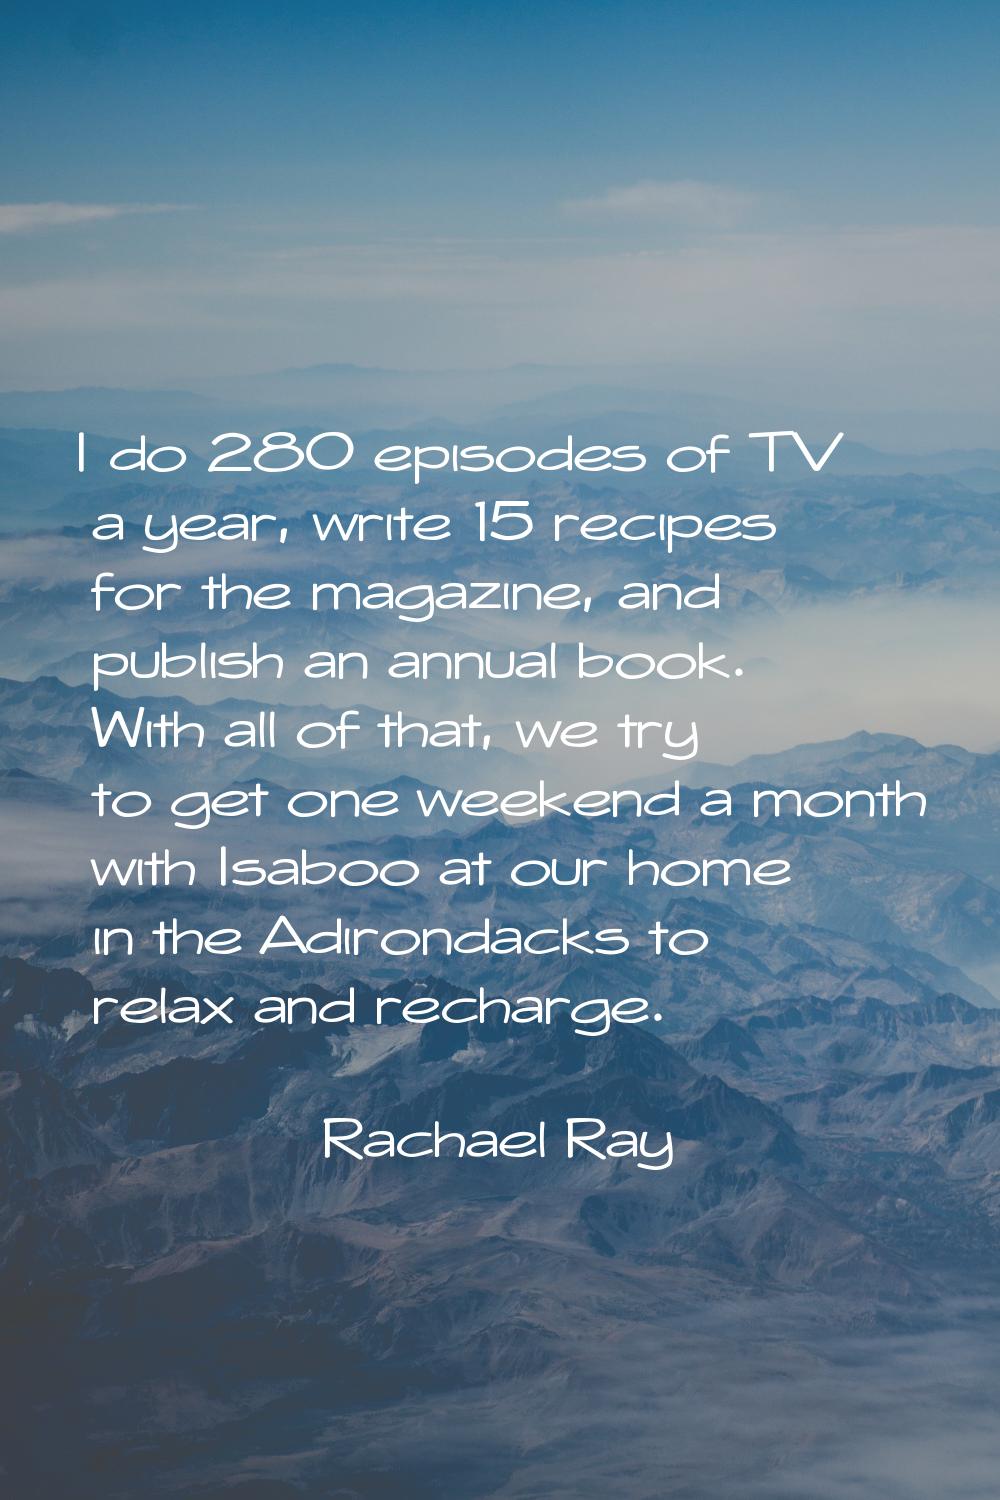 I do 280 episodes of TV a year, write 15 recipes for the magazine, and publish an annual book. With